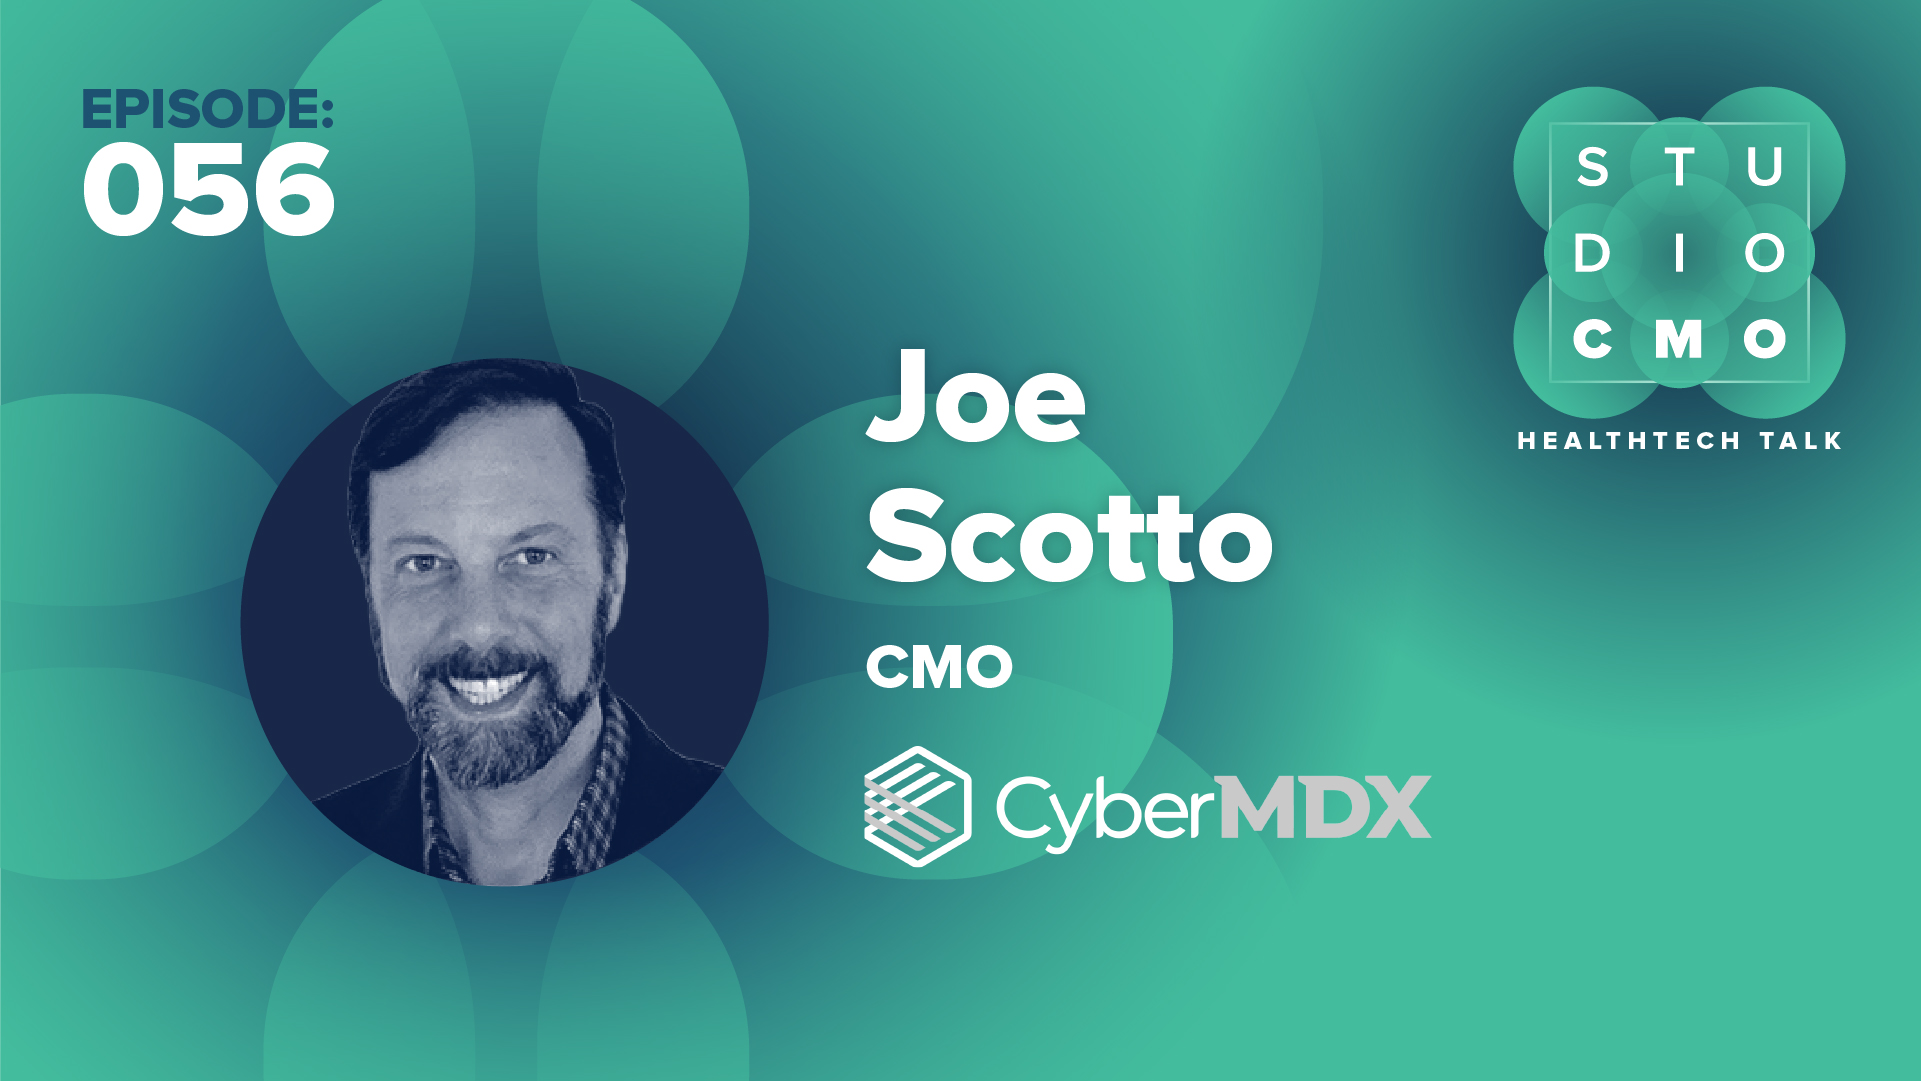 Healthcare endures breach after breach. HealthTech tools must prove to be secure. Joe Scotto of CyberMDX says security must be a part of marketing strategy.